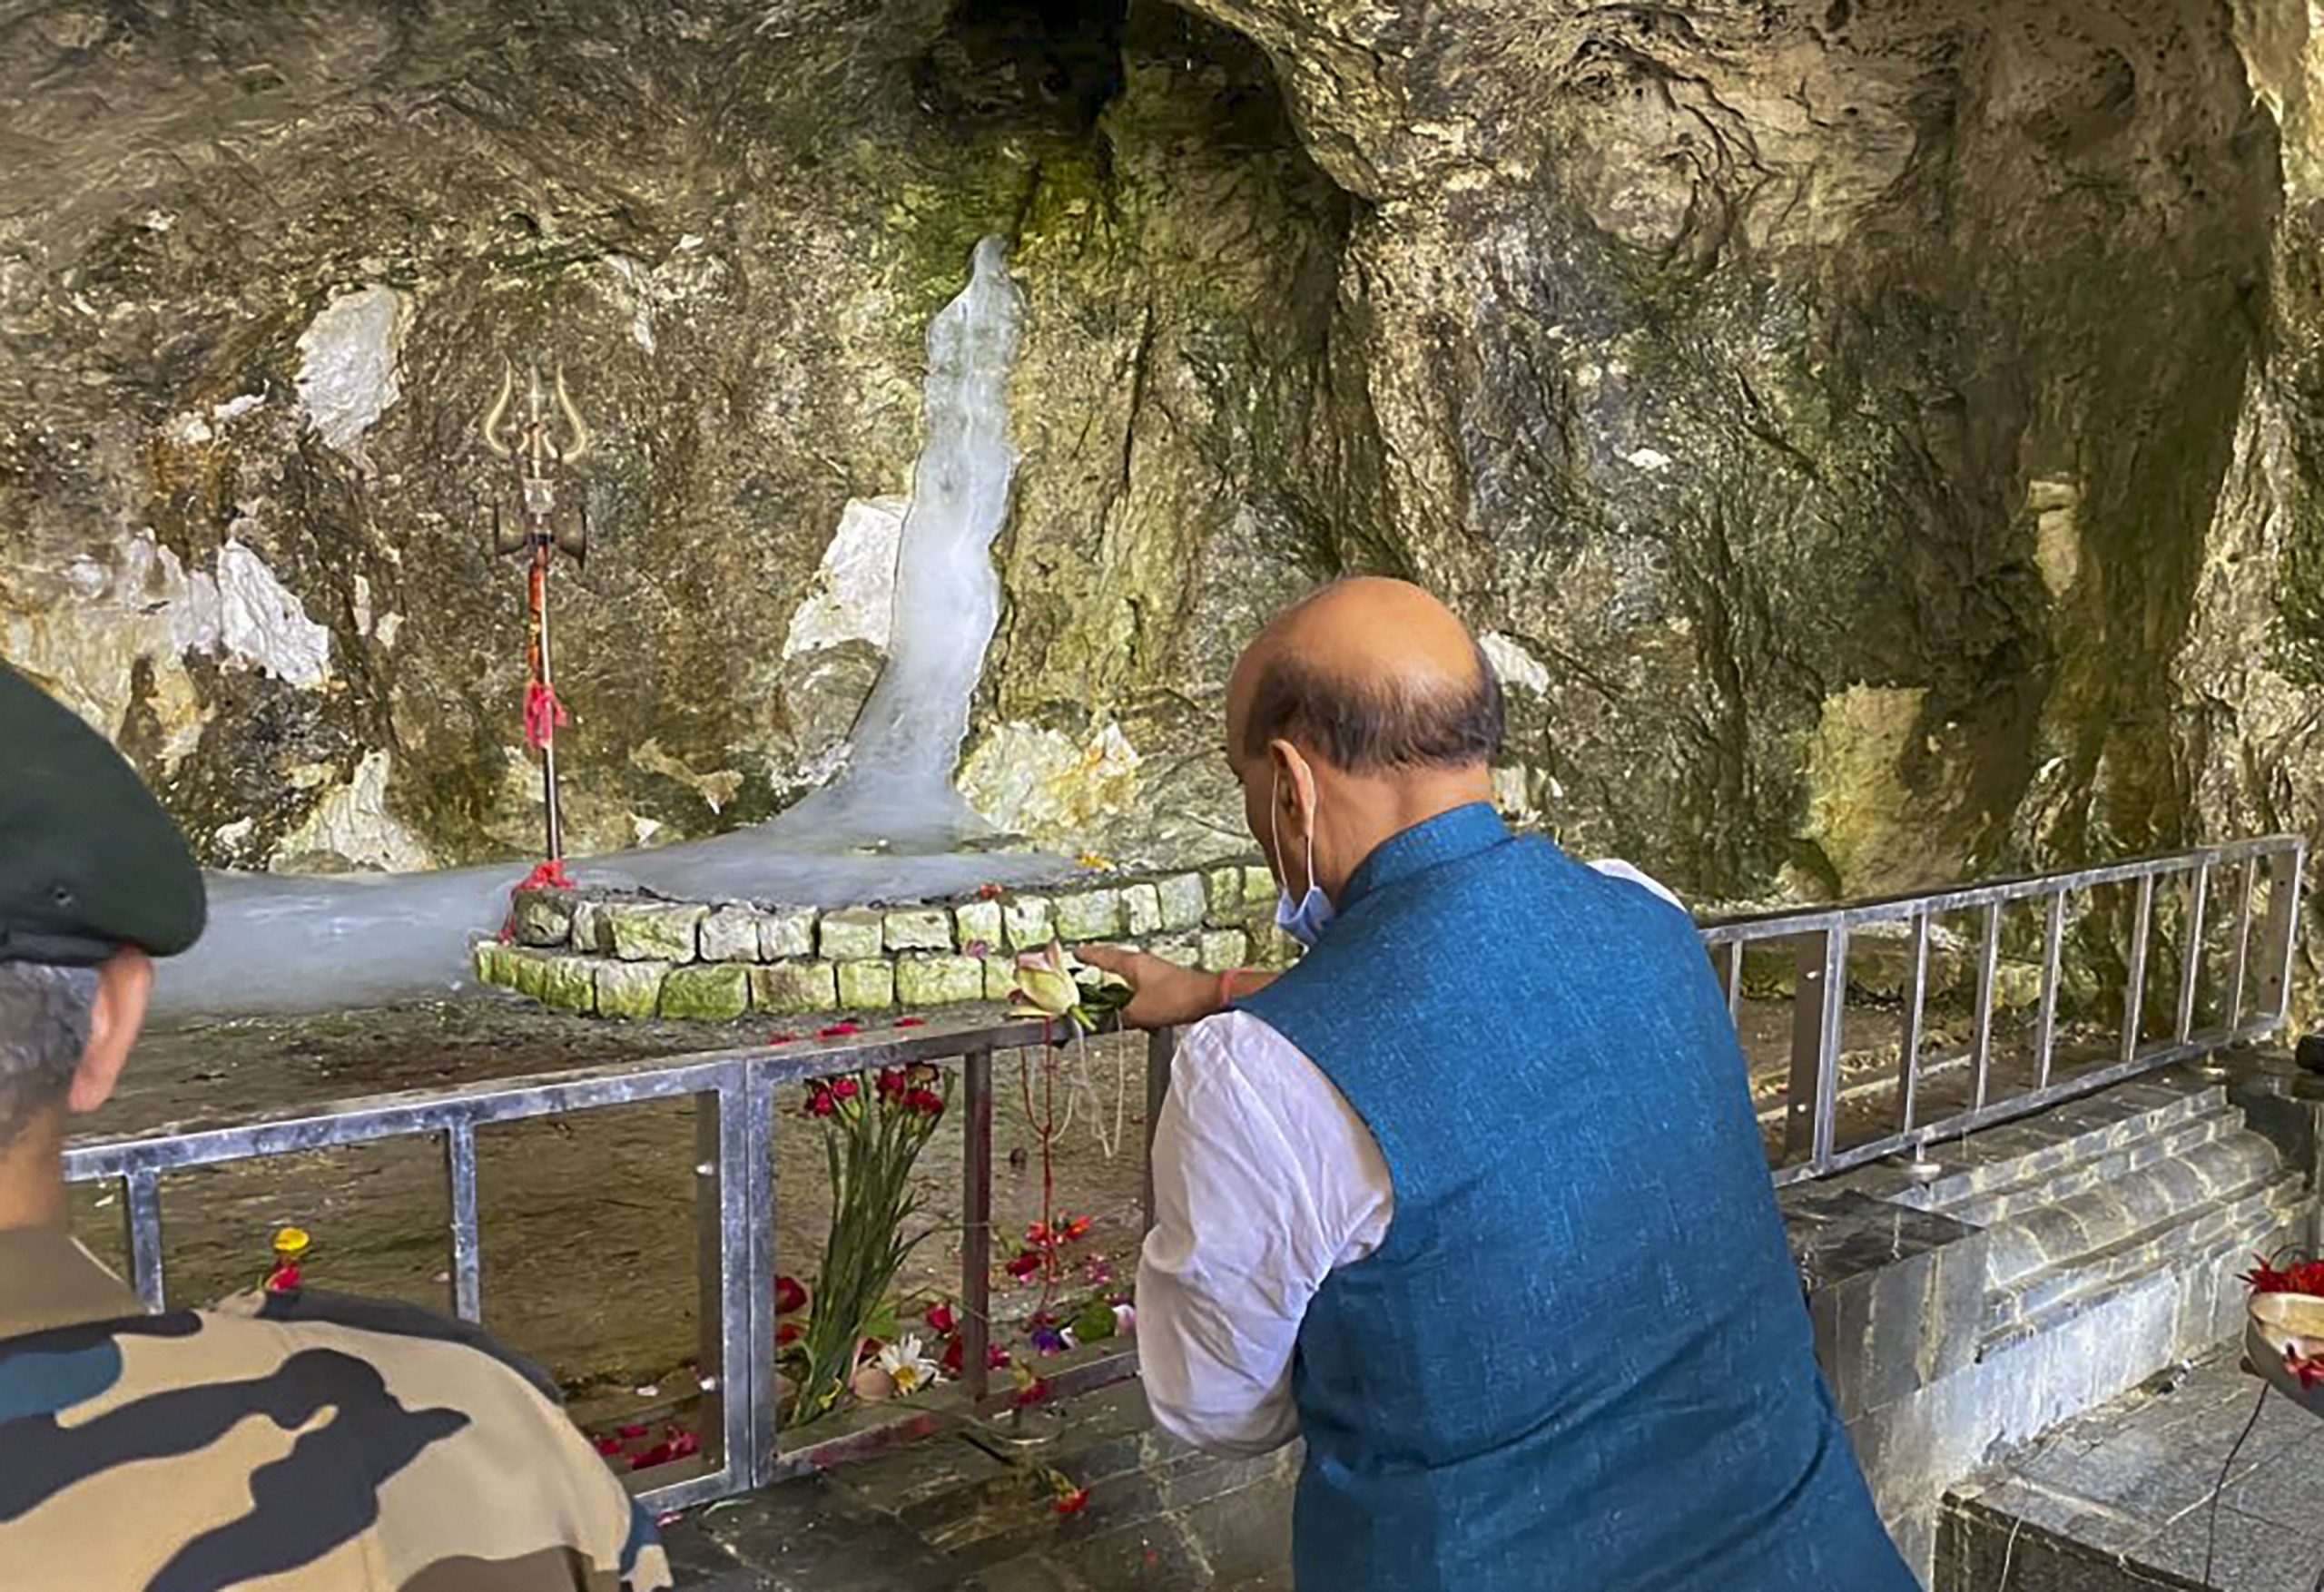 Amarnath Yatra cancelled due to COVID pandemic; online darshans to be arranged